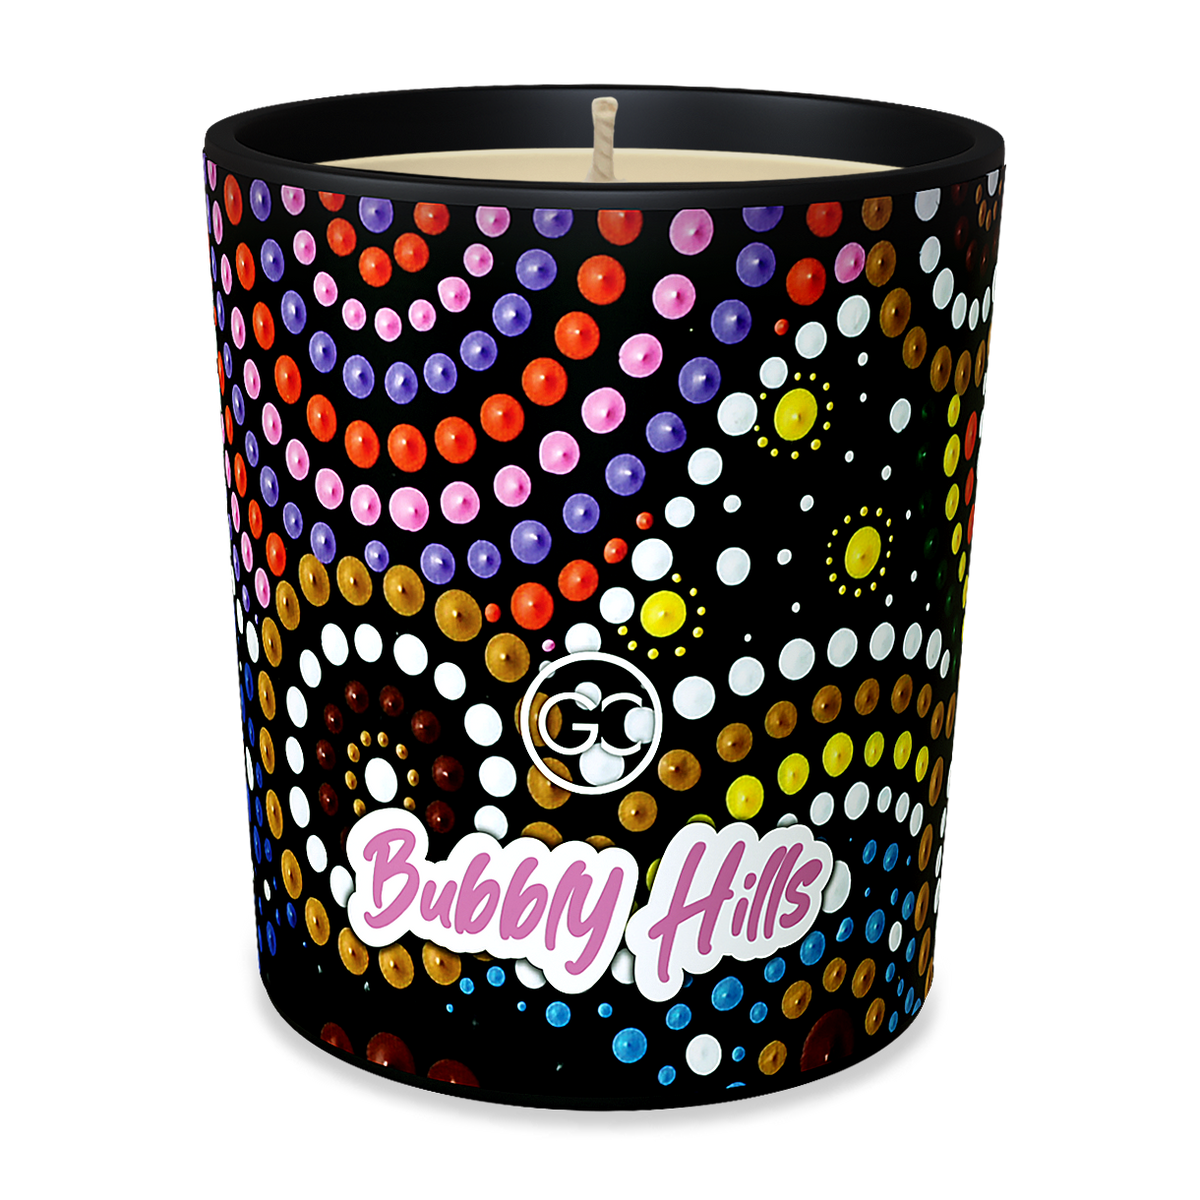 Bubbly Hills - Rhubarb and Vanilla Scented Soy Paraffin Candle 40hr Burn